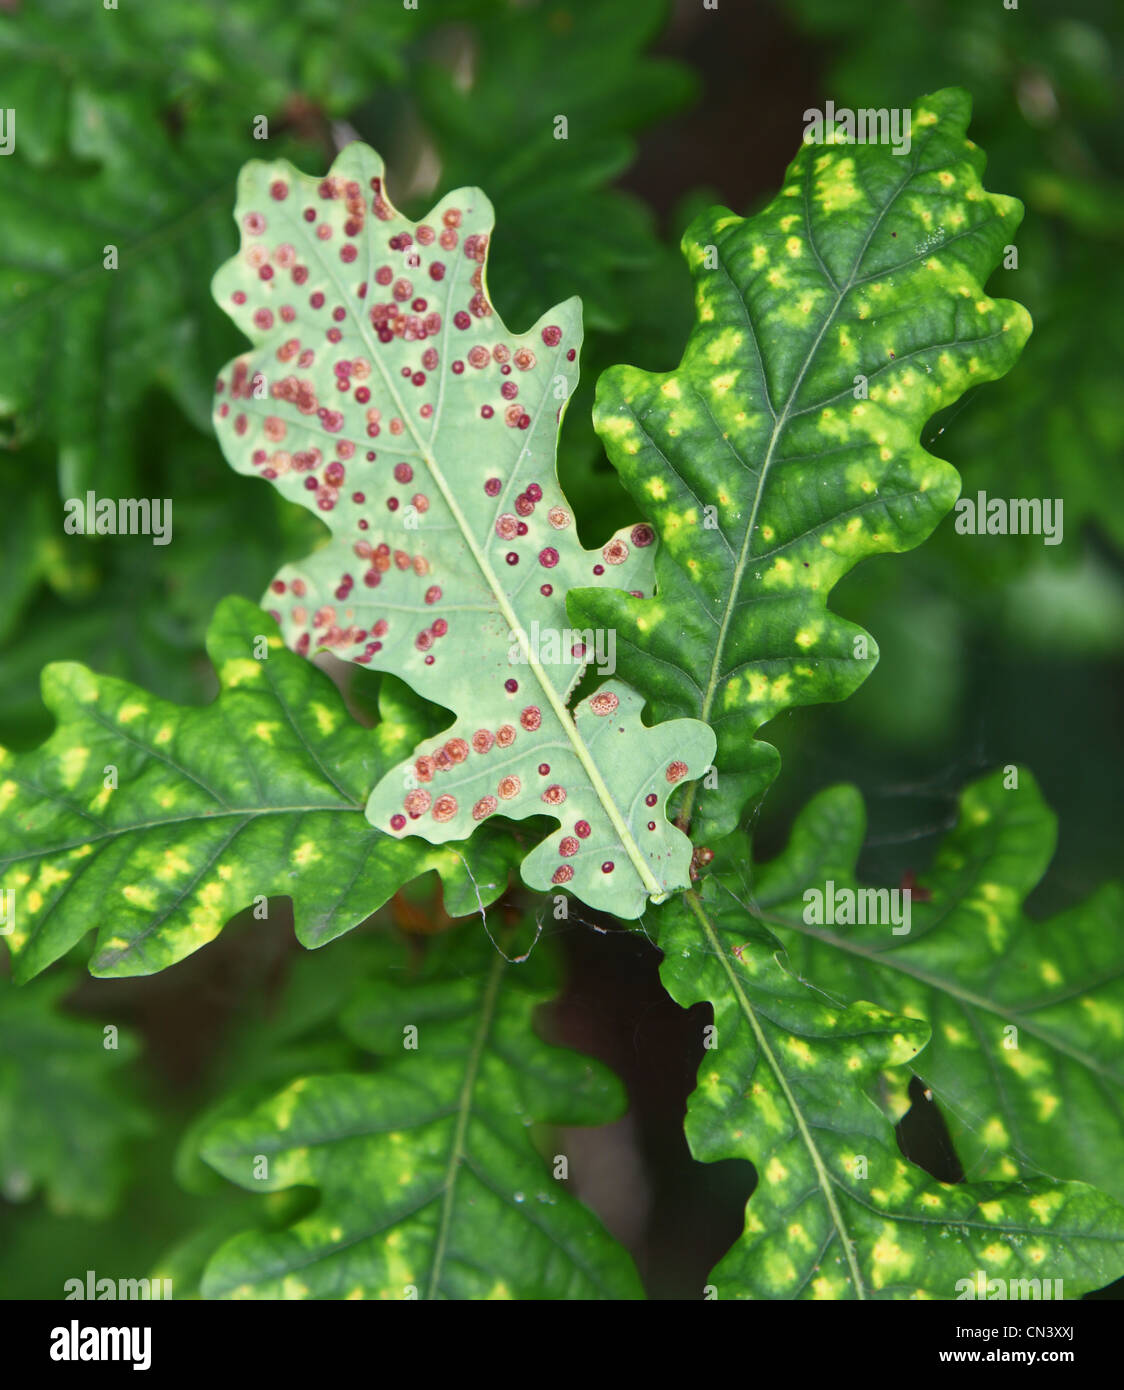 Rust spot pustules or Anthracnose, making the leaves turn yellow on an oak tree, England, UK Stock Photo